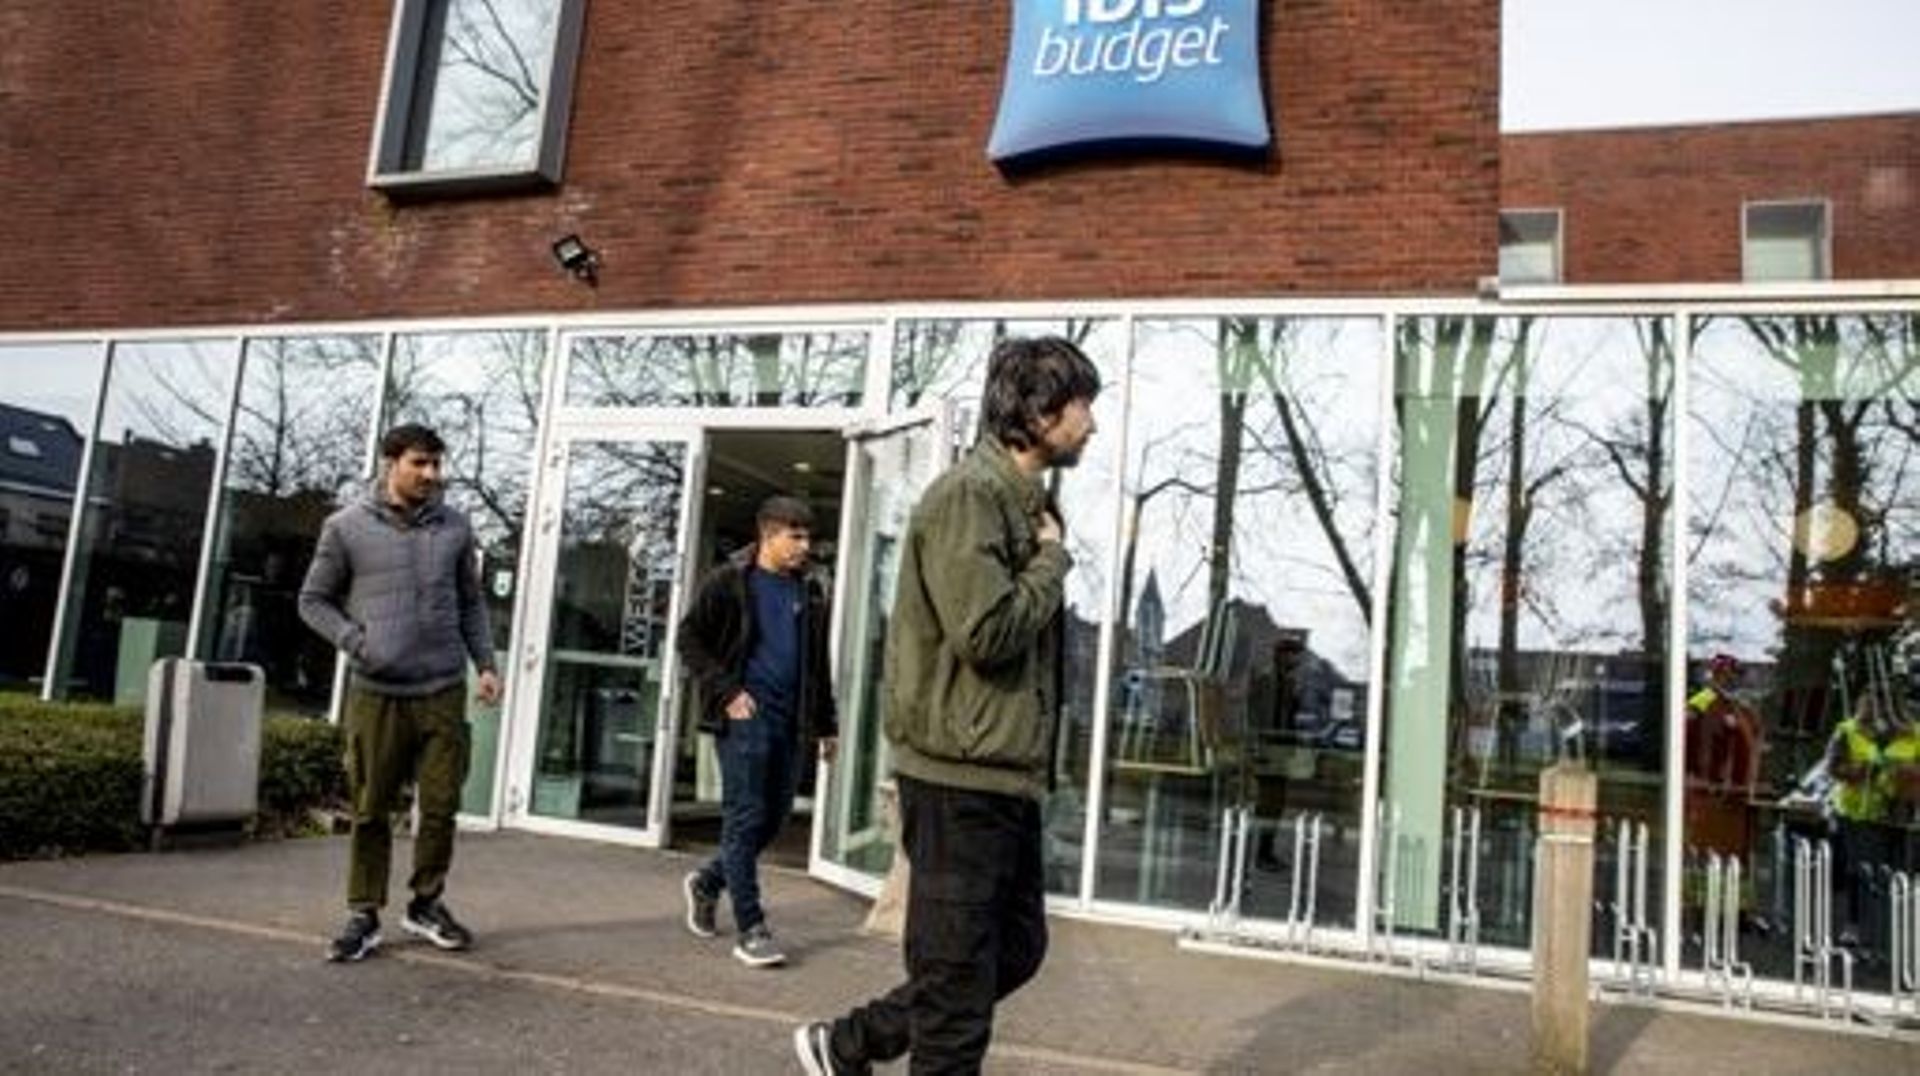 Illustration picture shows the Ibis Budget Hotel in Ruisbroek, Sint-Pieters-Leeuw, Thursday 16 February 2023. Following the evacuation of the squatted so-called Palais des Droits – Rechtenpaleis building, at the Paleizenstraat – Rue des Palais, lots of as